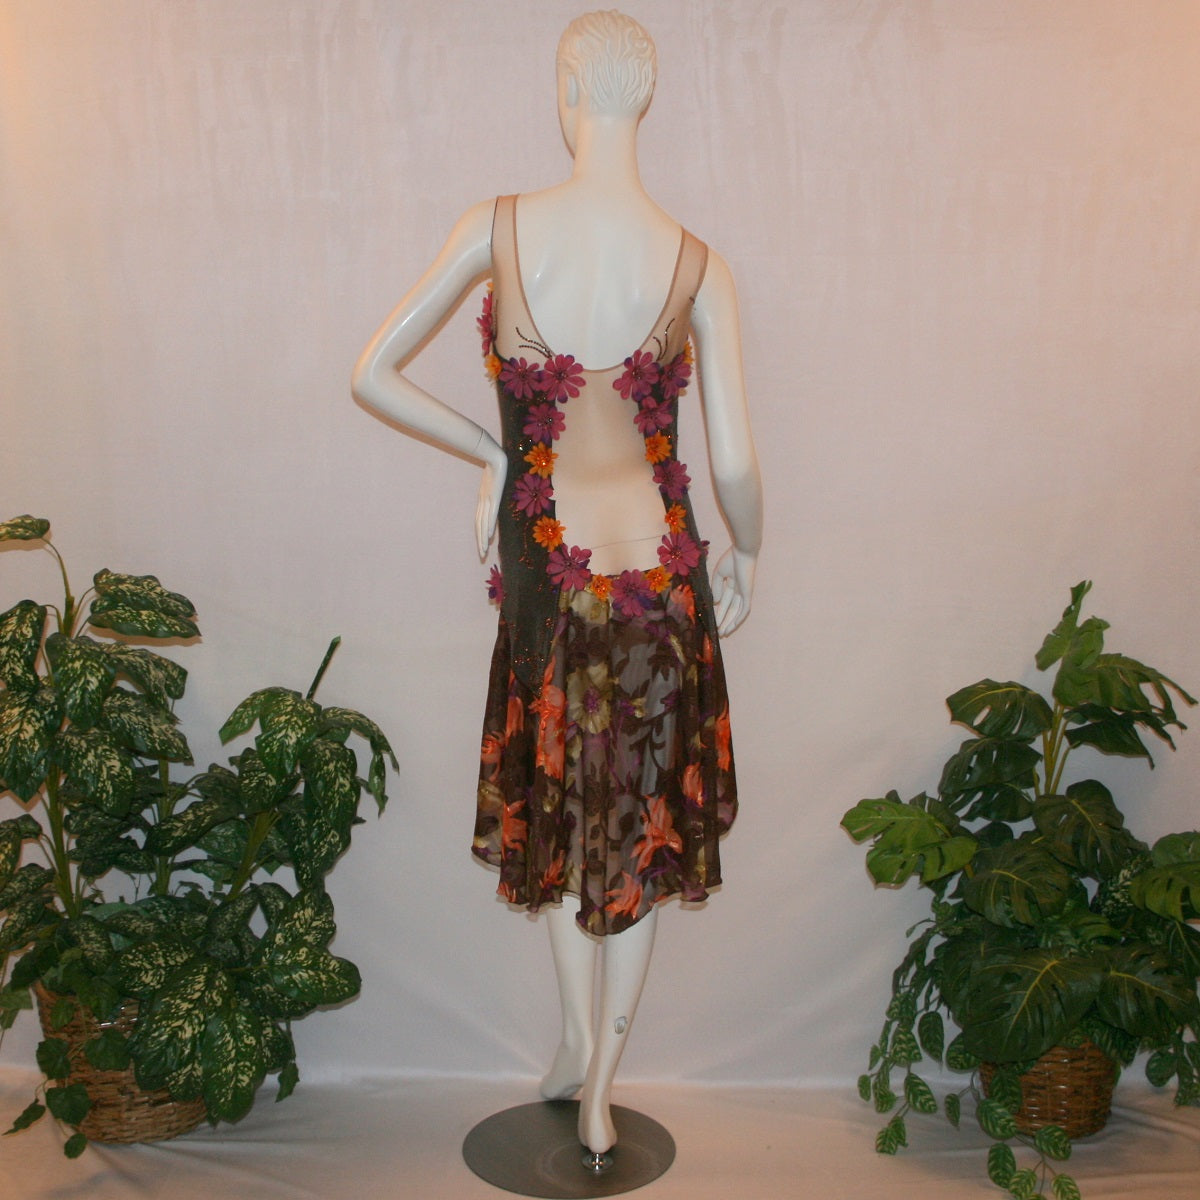 back view of Latin-rhythm dress of Brown converta ballroom dress created in deep chocolate brown slinky on a nude illusion base with panels of a gorgeous flowered chiffon with a sheen in browns, oranges, yellows, greens, burgundies & purples, with silk flower embellishments & Swarovski detailed rhinestone work.